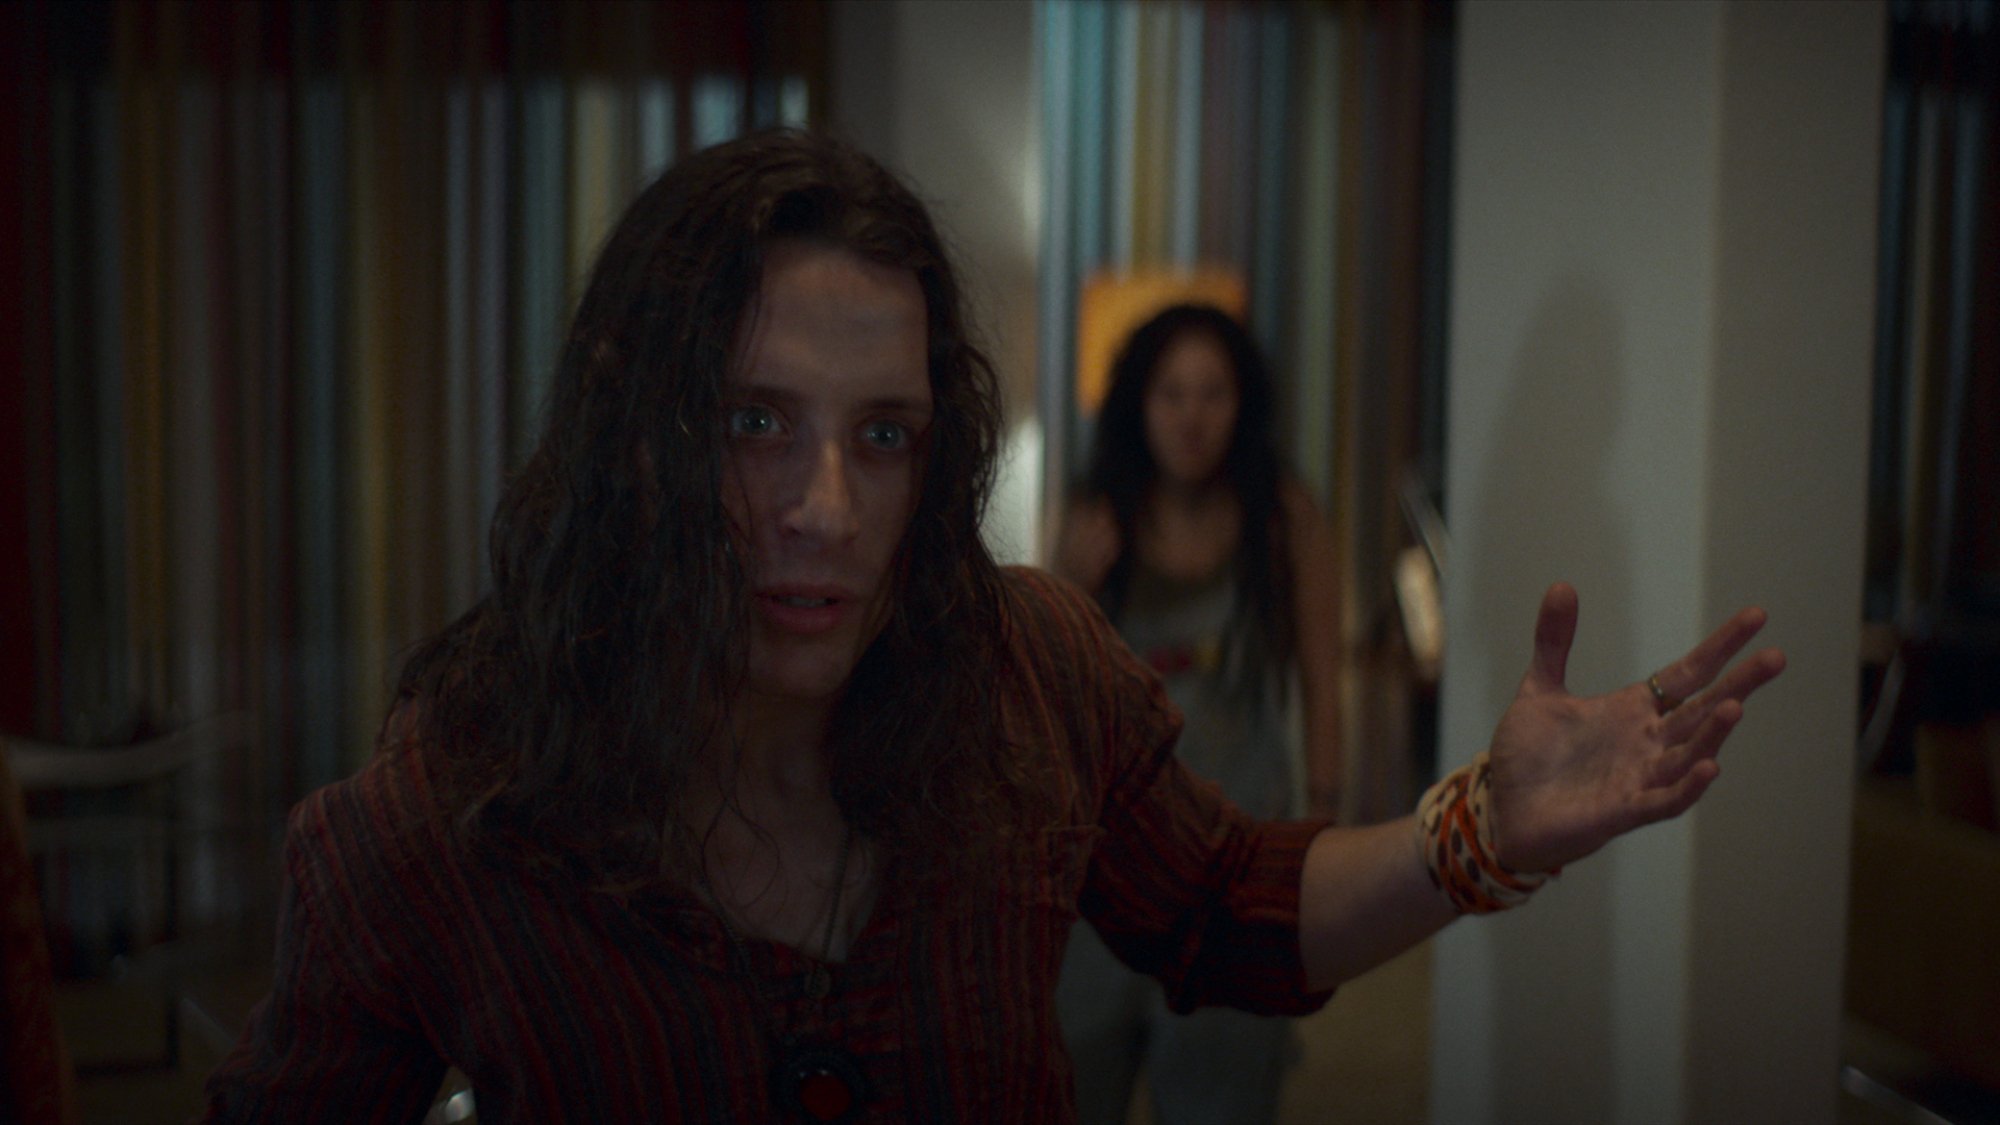 In the TV show "Black Mirror" Rory Culkin is a cult leader leading a home invasion.